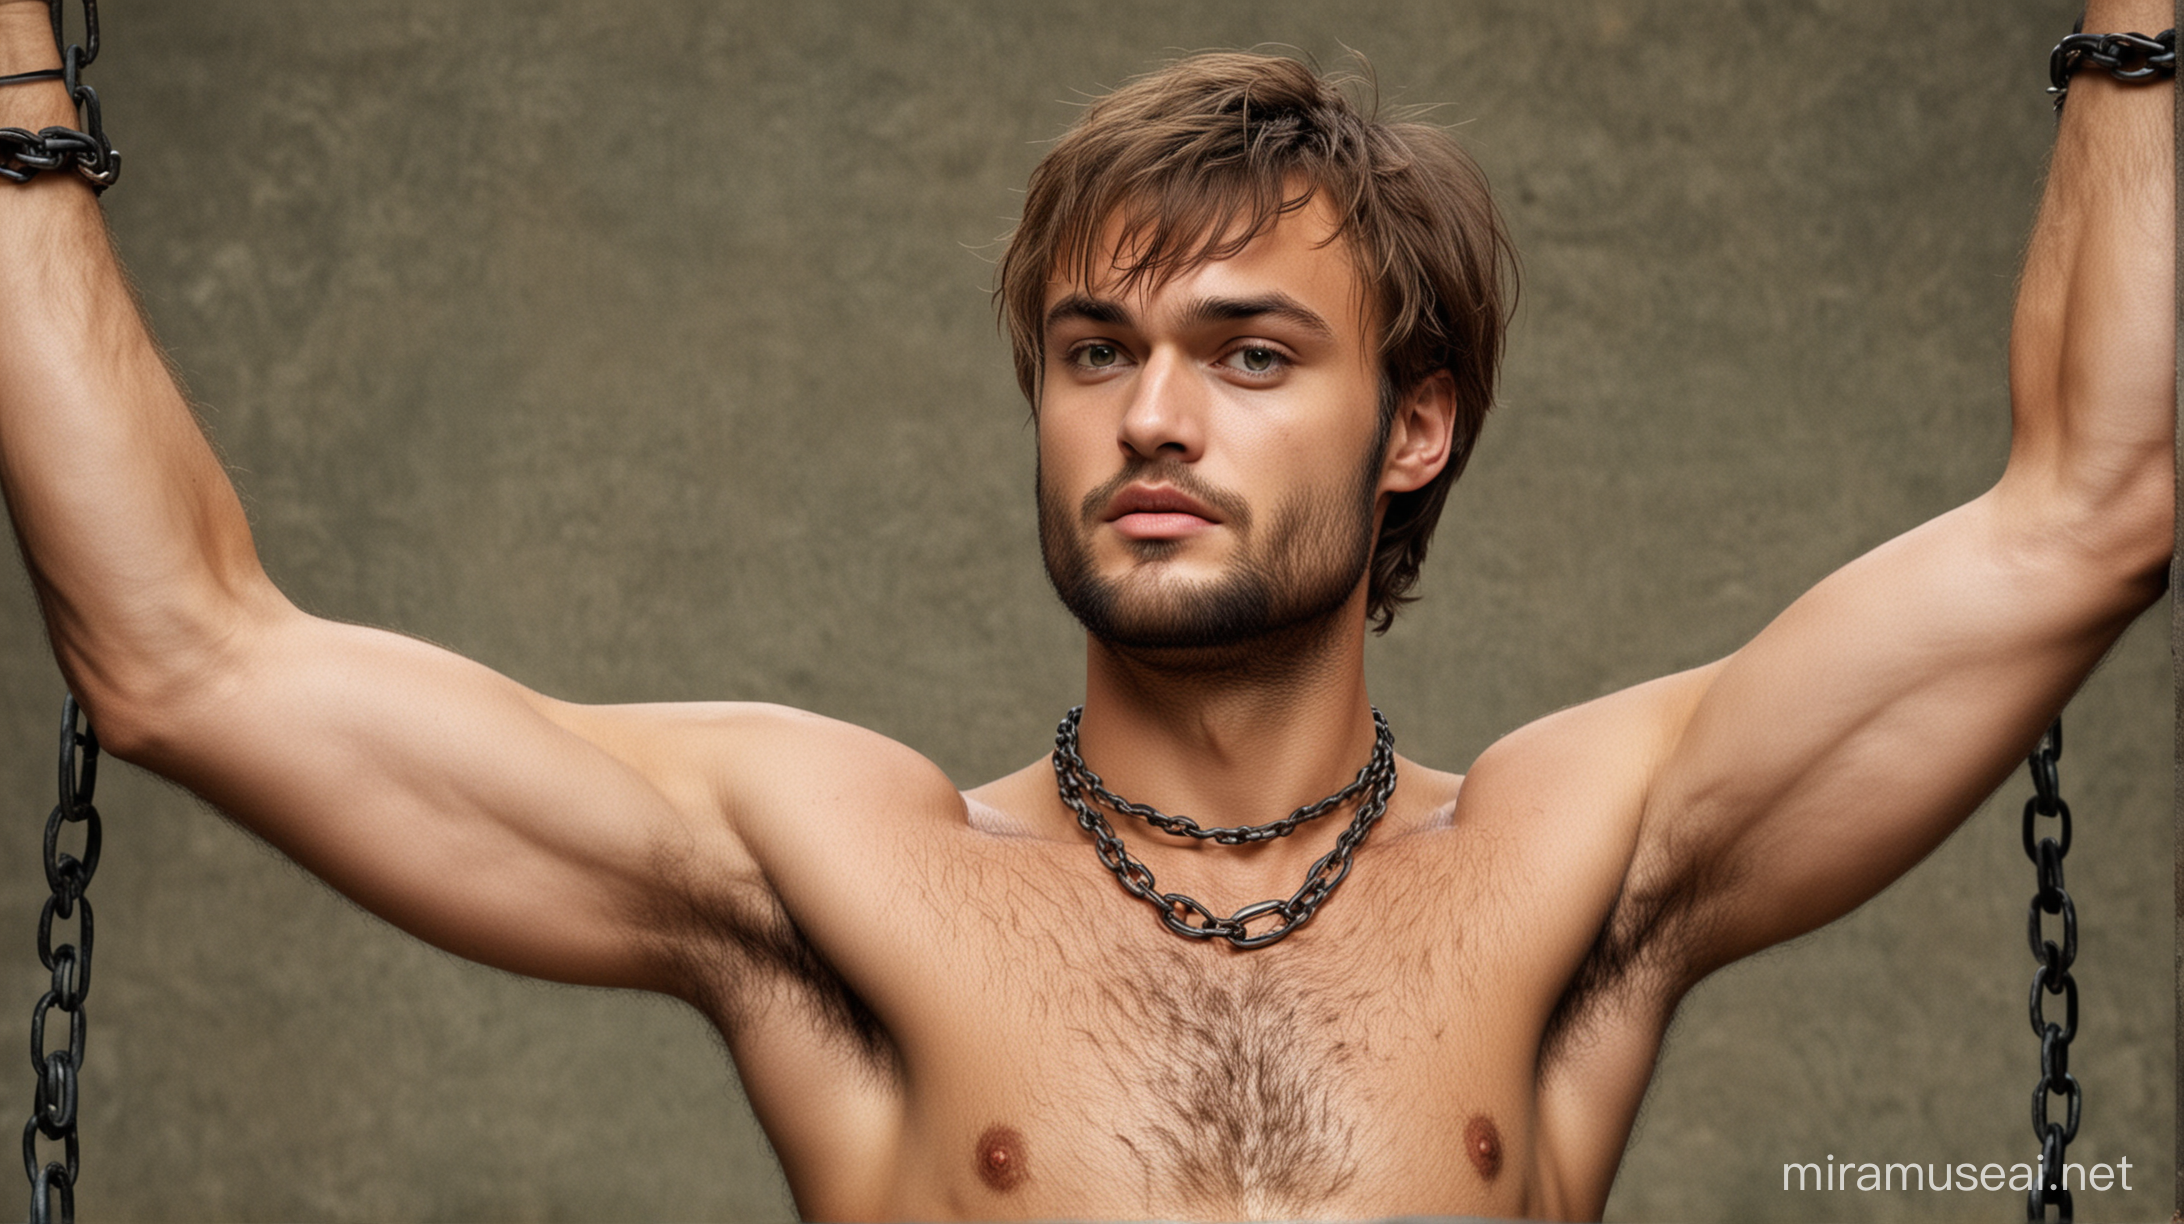 Actor Douglas Booth, very hairy,  with a lot of beard and a very hairy body. Booth, slave, wrists tied with chains, raising and stretching his arms, showing very hairy armpits, green eyes, no shirt, very hairy chest like in the past, short hair, serious expression, unshaven, body and chest very hairy.